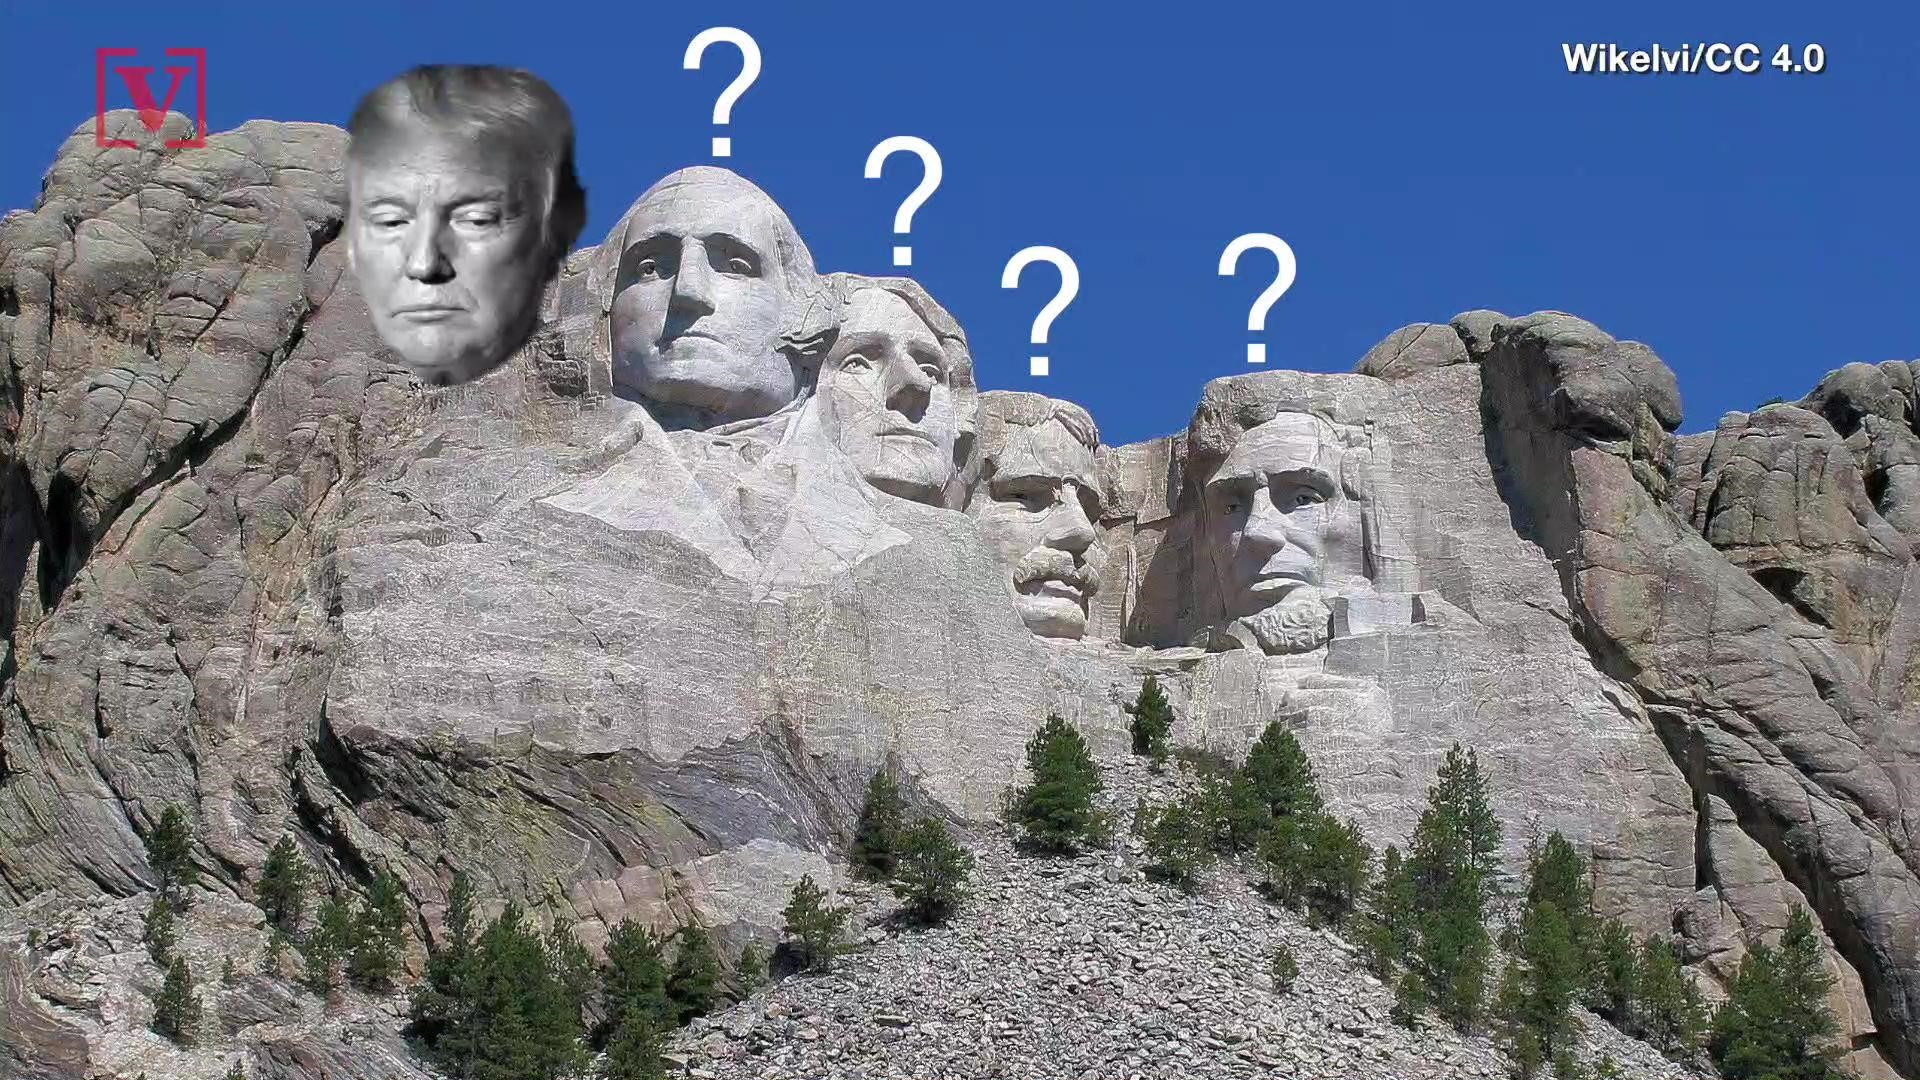 South Dakota Representative Kristi Noem claims President Trump's ultimate 'dream' is to have his face on Mount Rushmore. Nathan Rousseau Smith has the story.